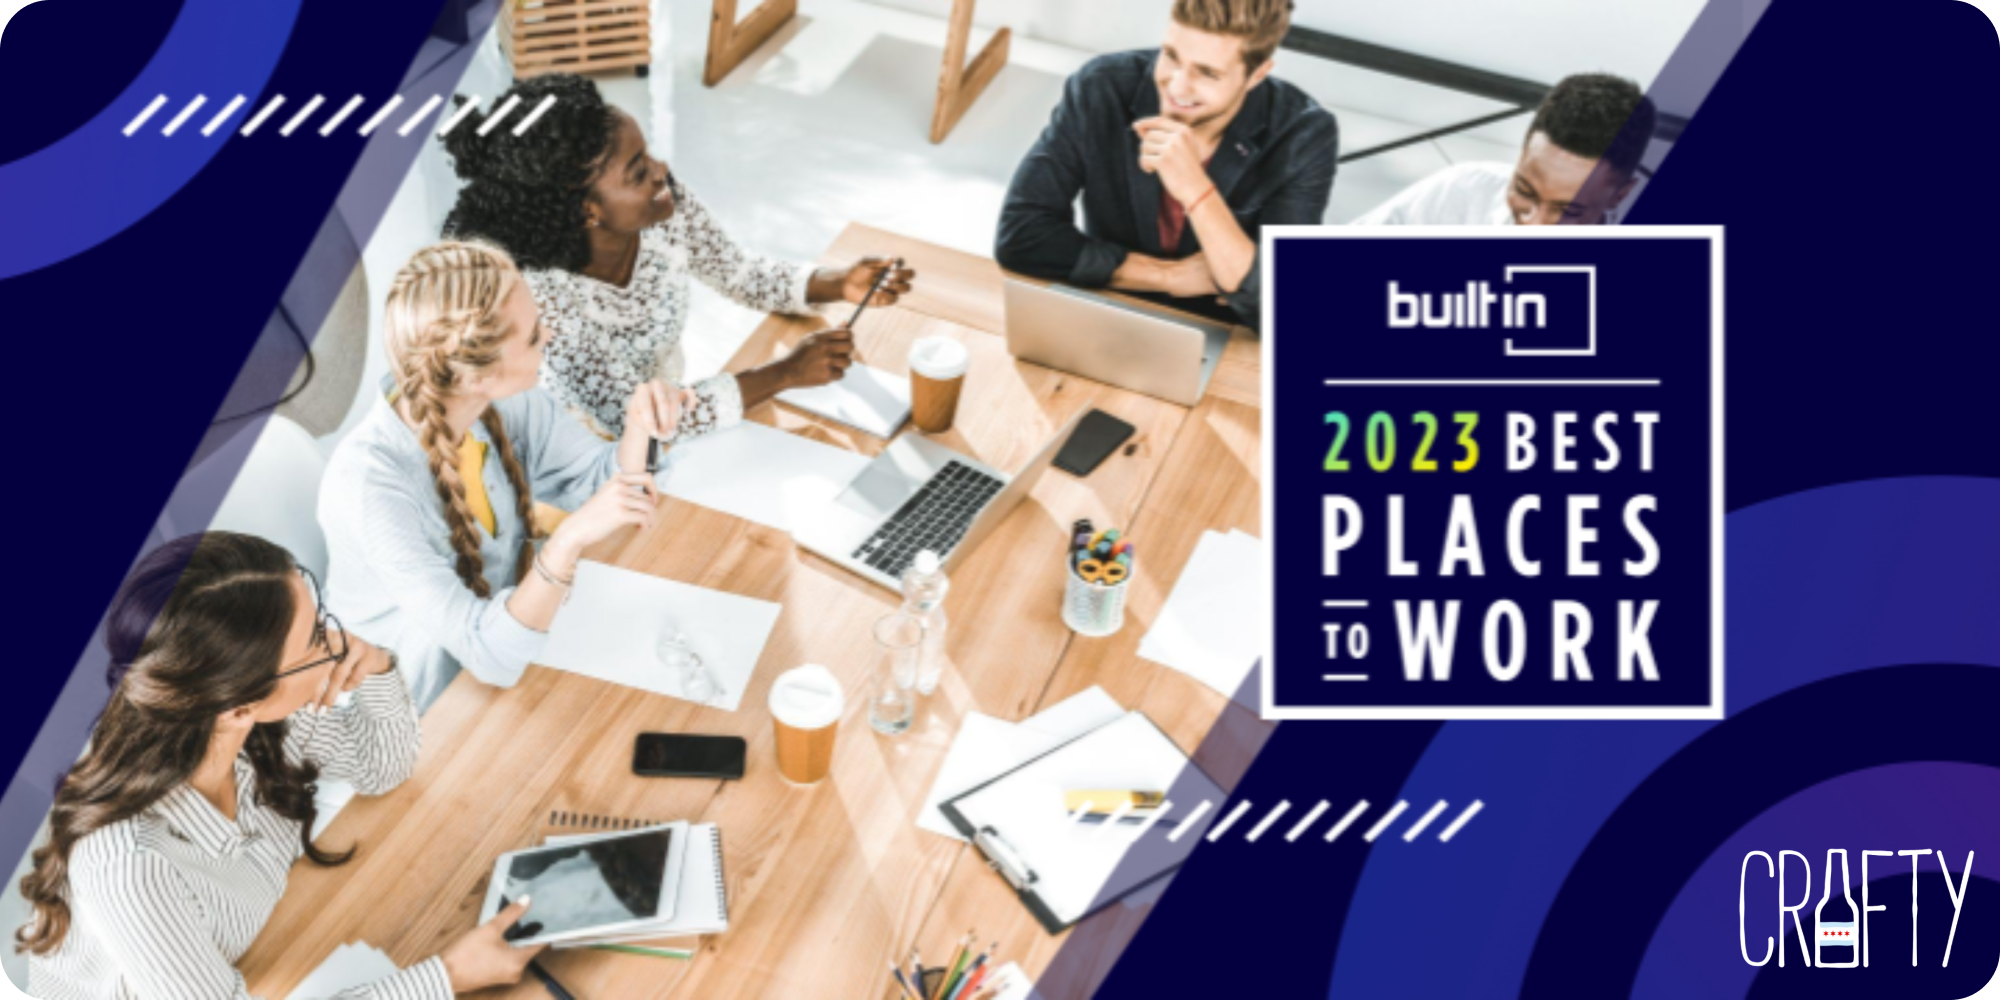 Crafty Wins Built In 2023 Top Workplace Award